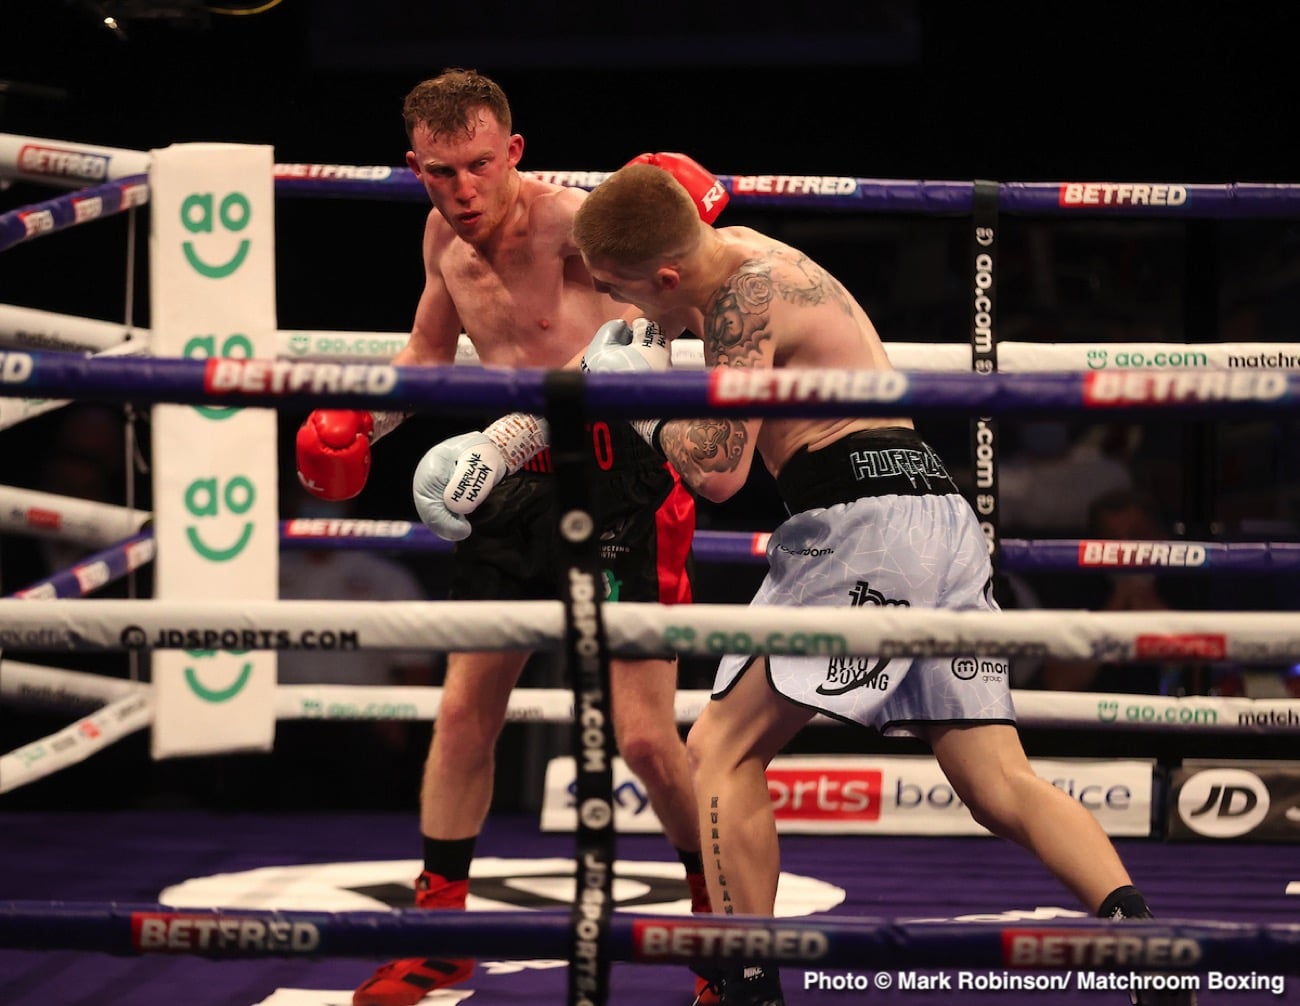 Campbell Hatton boxing image / photo